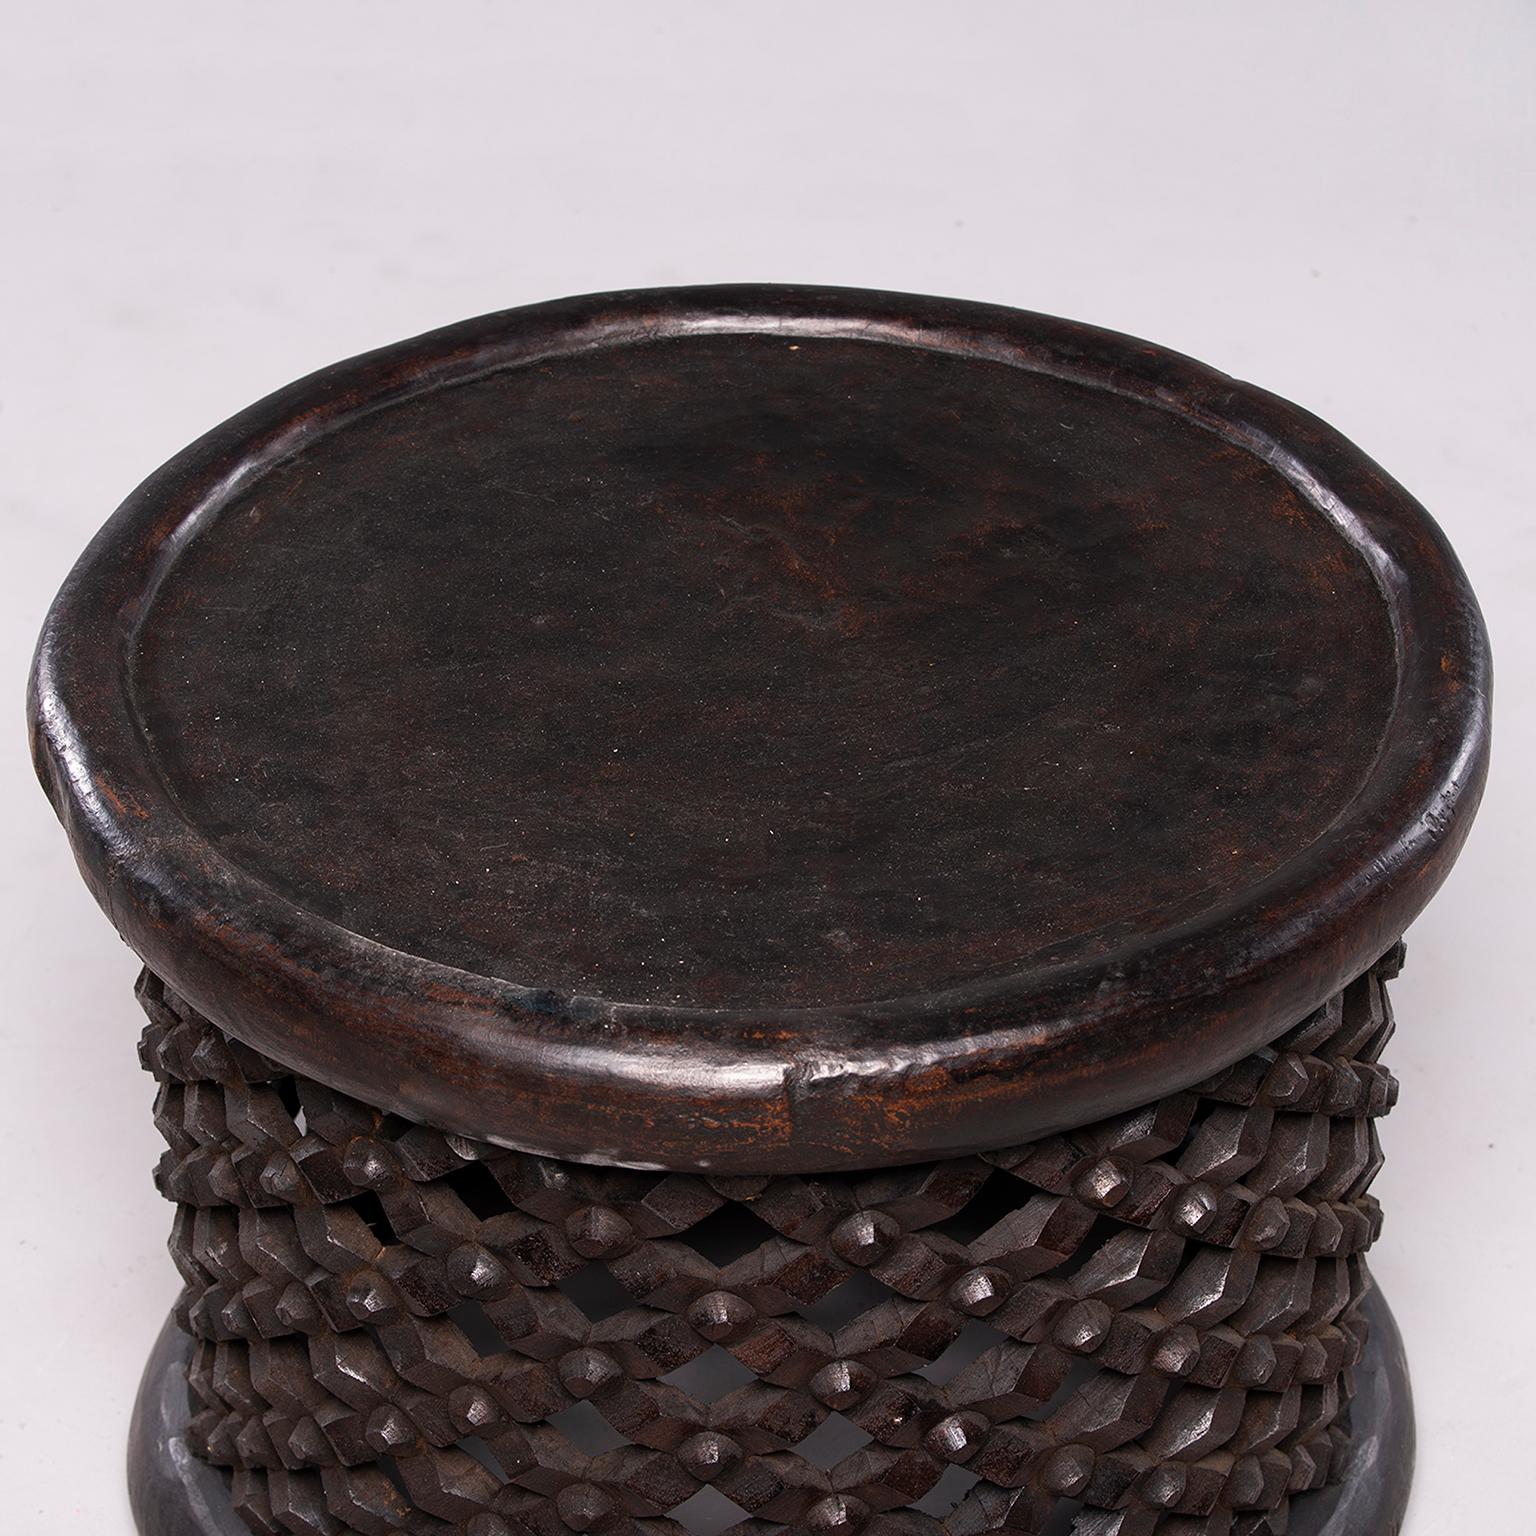 Cameroonian African Bameleke Carved Wood Table or Stool